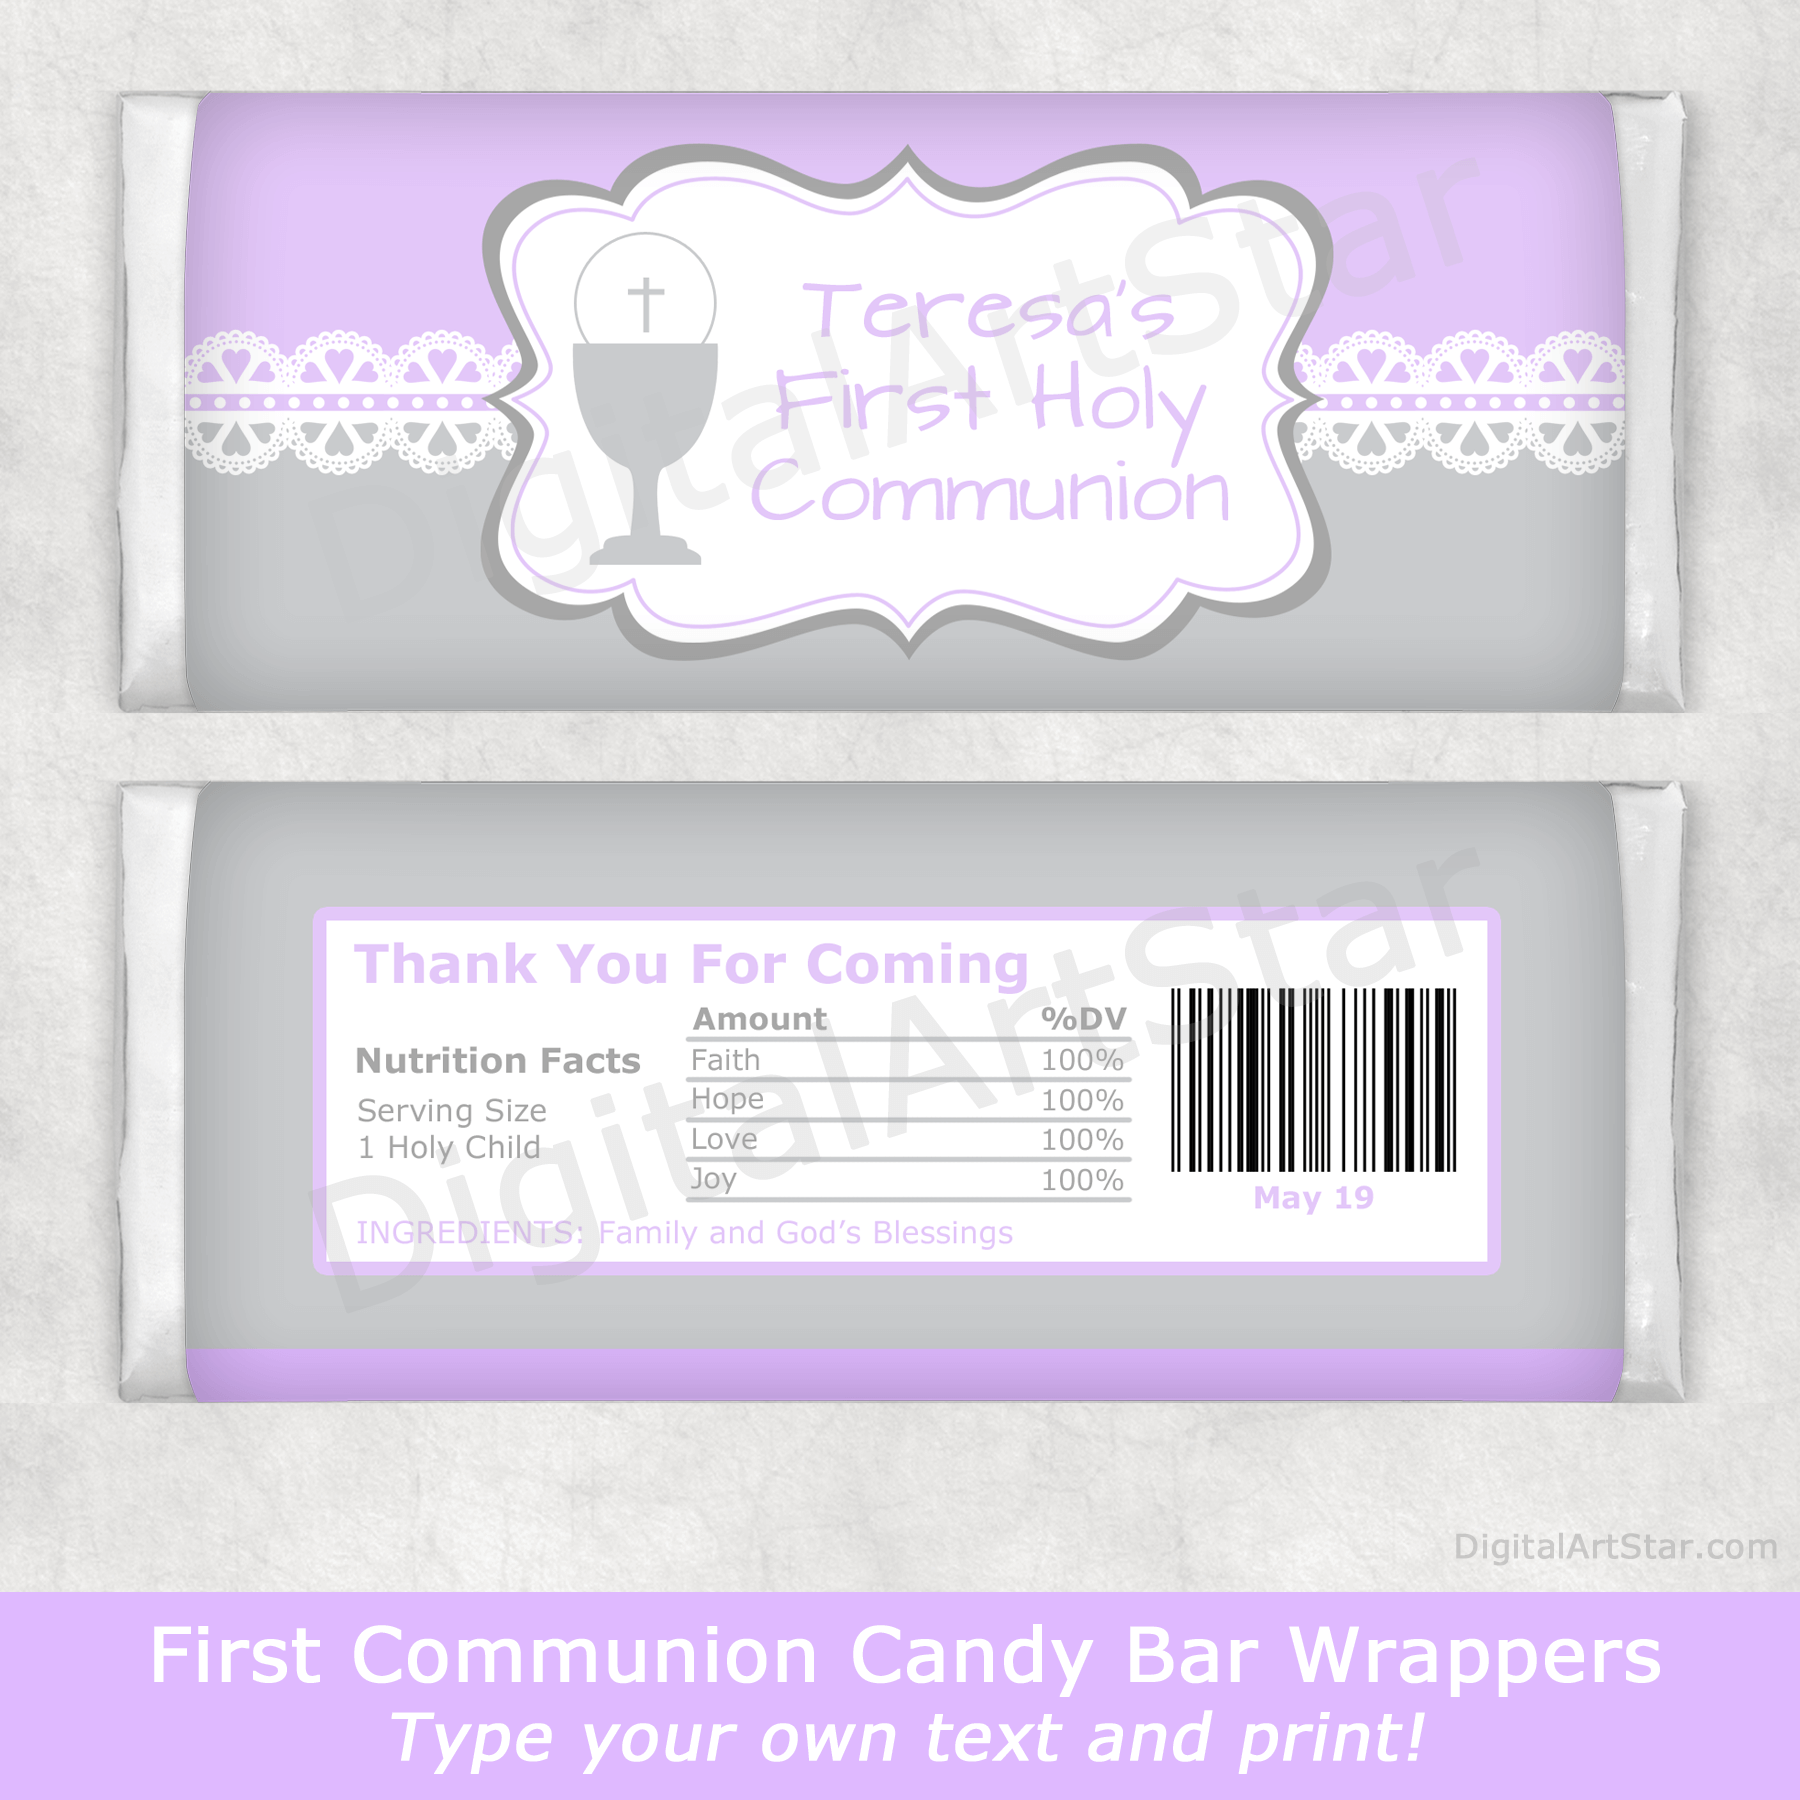 Lavender and Silver Communion Candy Bar Wrappers